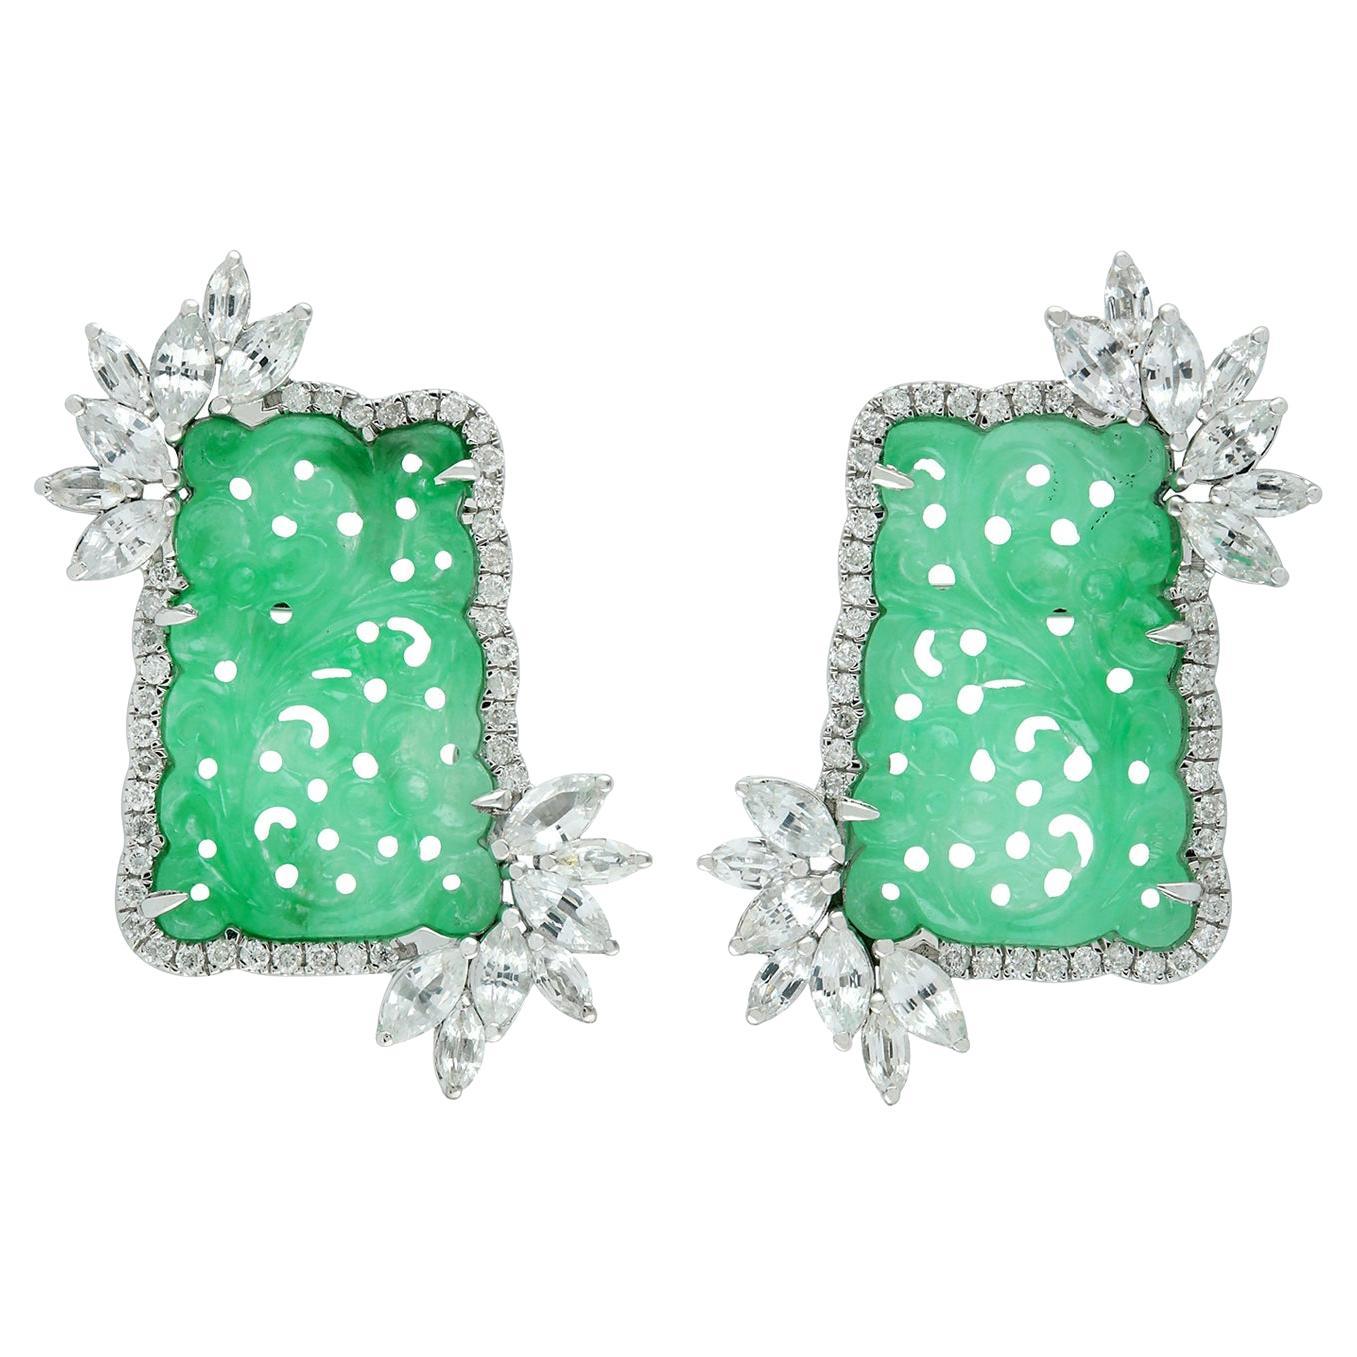 Carved Jade Stud Earrings With White Sapphire & Diamonds Made In 18k White Gold For Sale